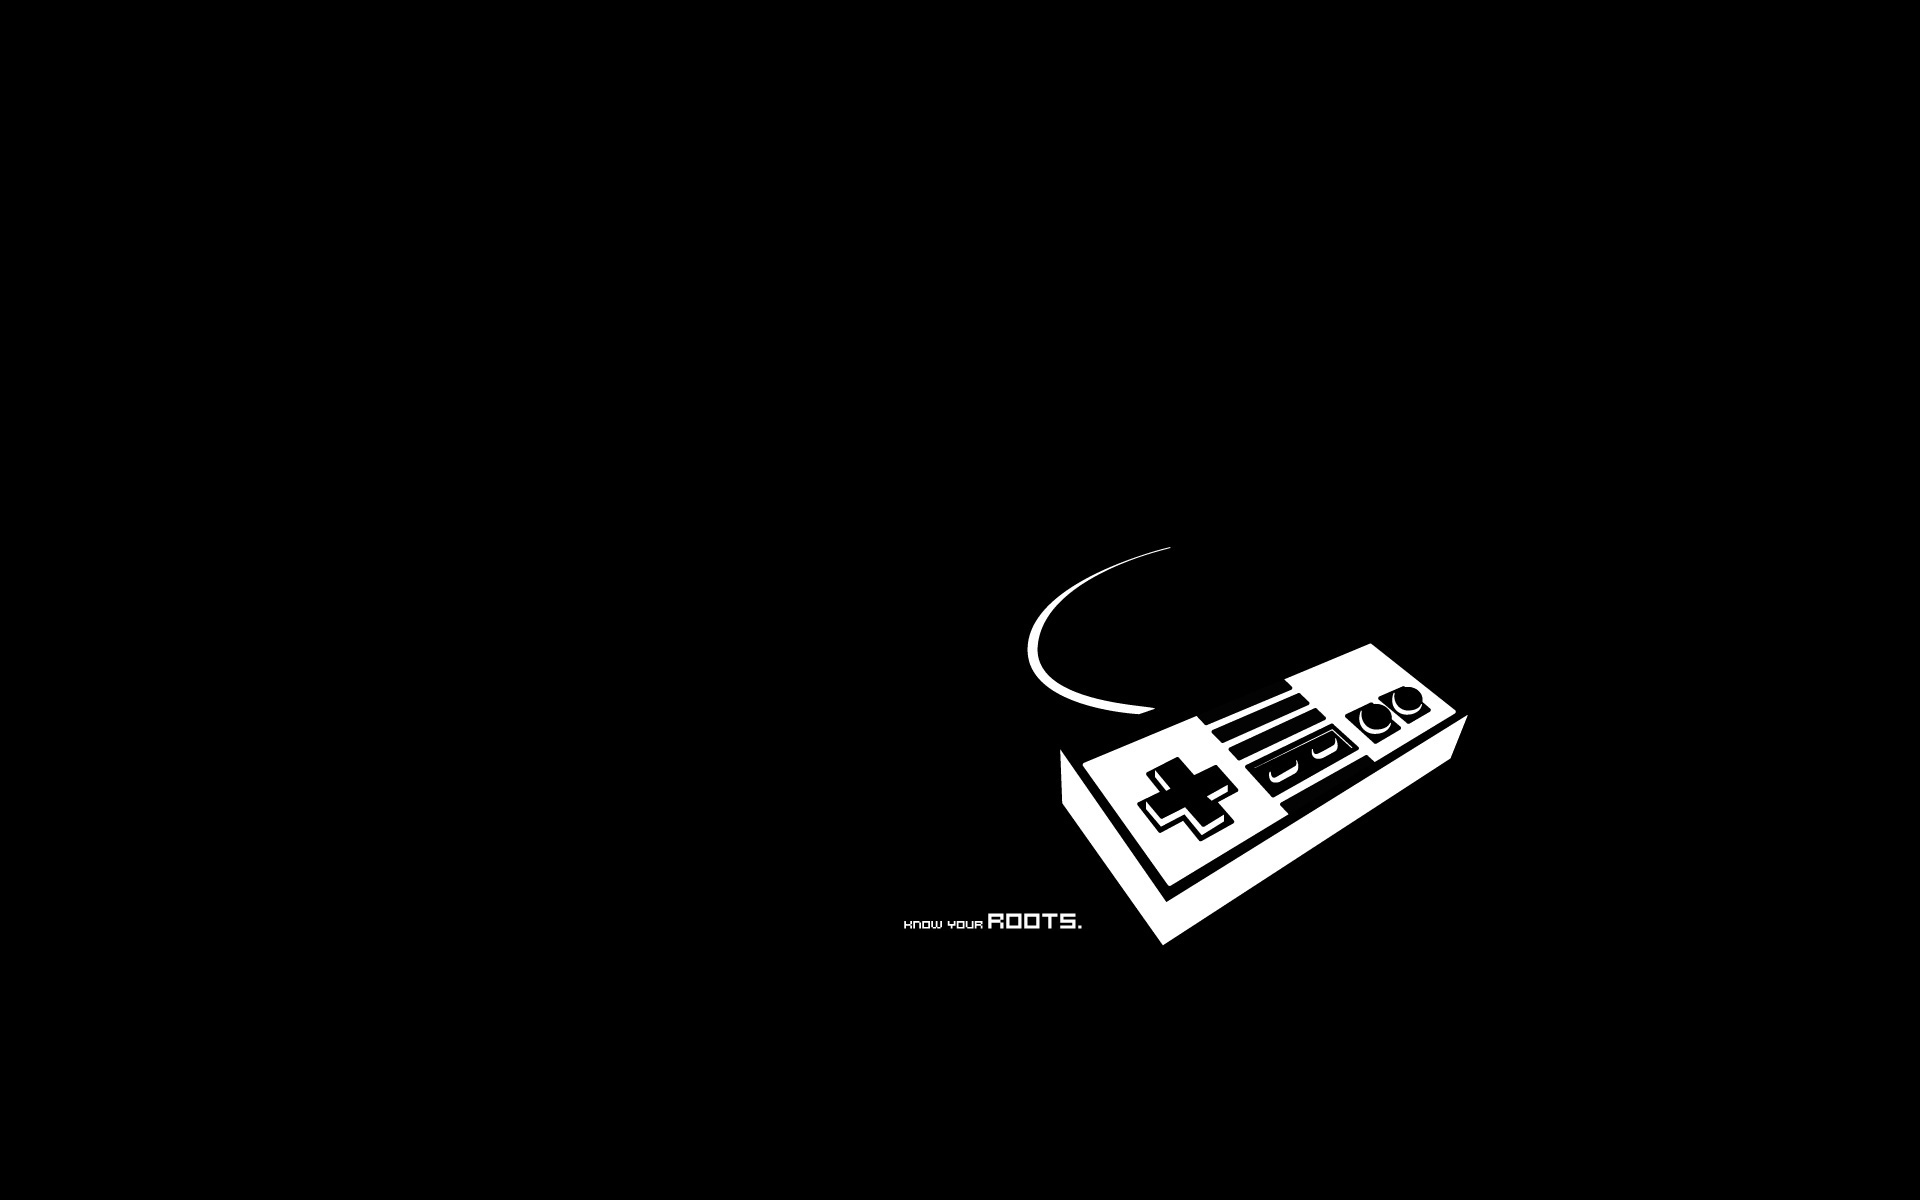 video games, nes game console, controllers - desktop wallpaper